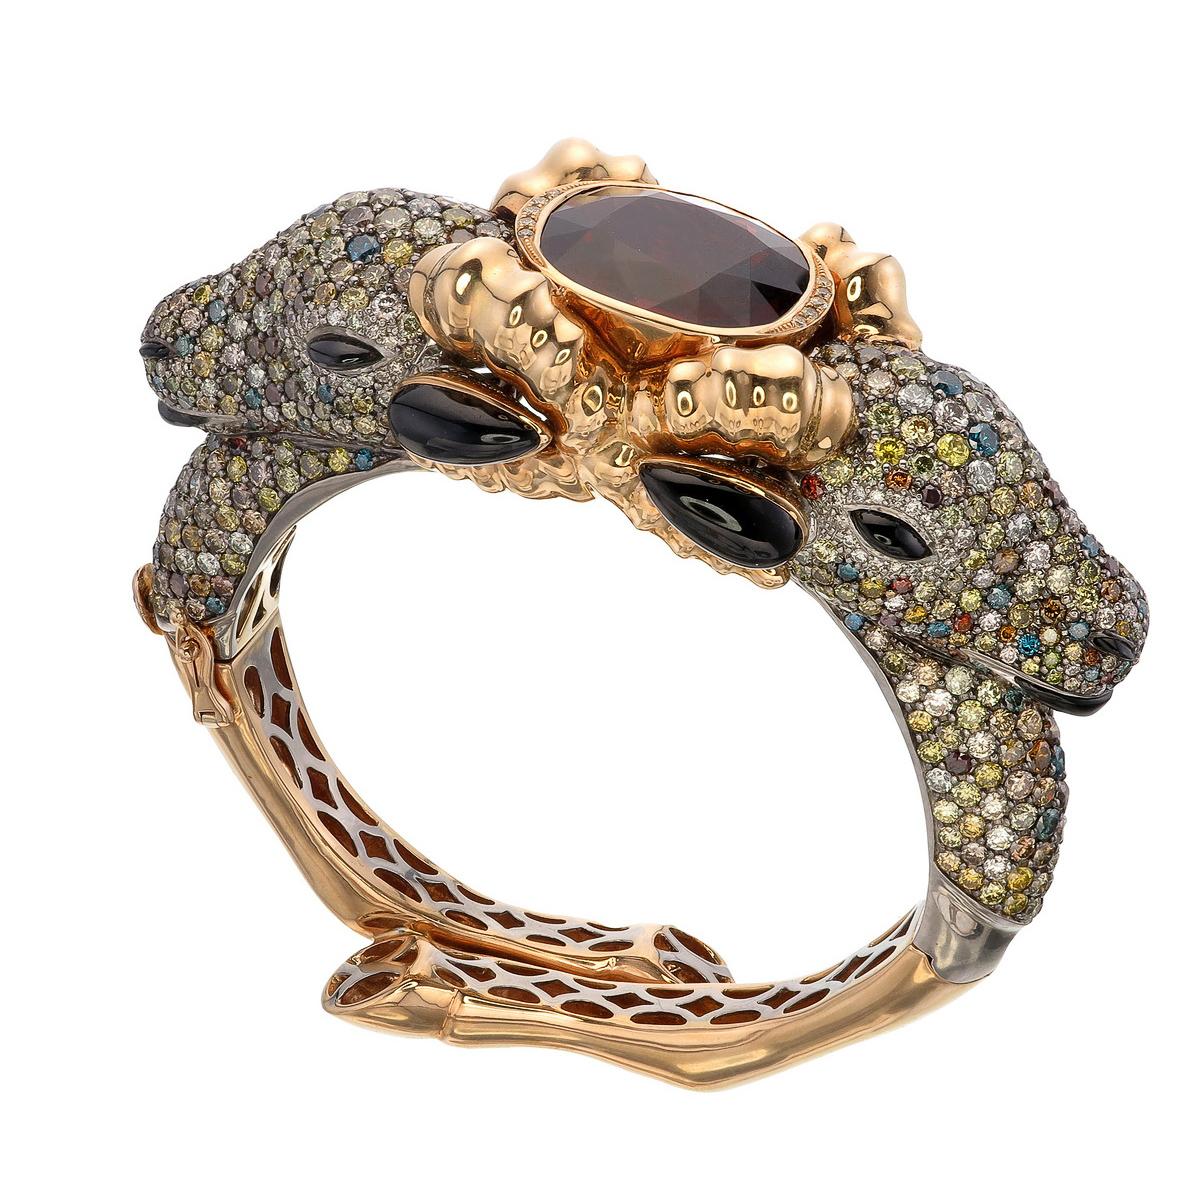 Sauvage Collection- One of a Kind Bangle

A two-faced Ram bangle holds the fiery 36.15-carat Spessartite Garnet in the middle displays the symphony of this exquisite masterwork. With 25.68-carat of fancy diamonds, it harmonizes an irresistible aura